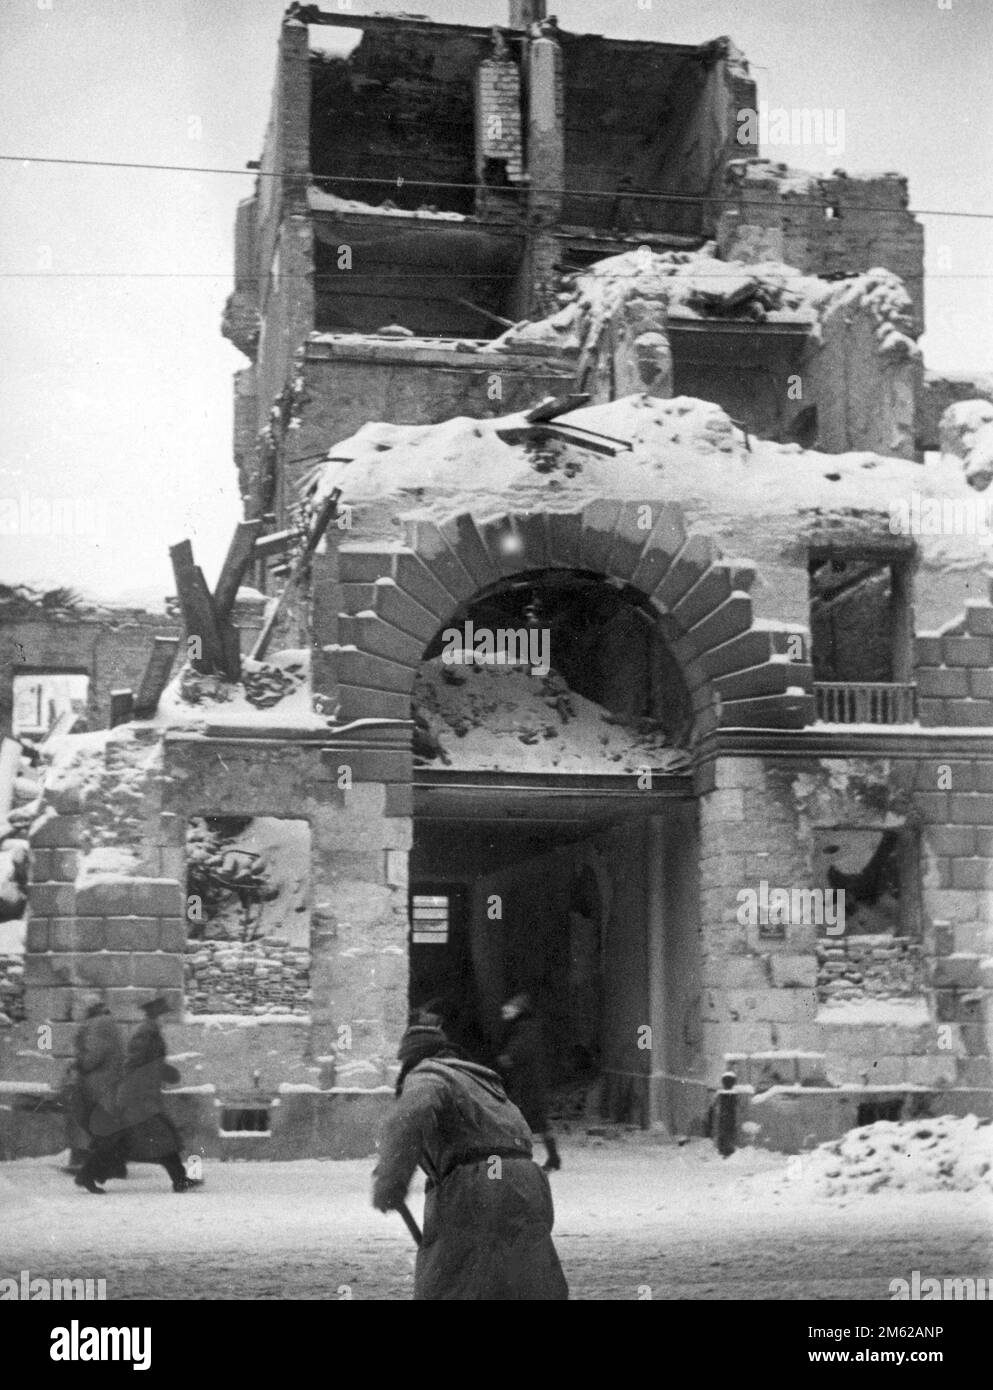 Entrance gate to a destroyed building in warsaw, Poland. The source gives the date as 1939, The people are wearing coats which suggests the image dates from late 1939 after the German invasion and Polish surrender Stock Photo